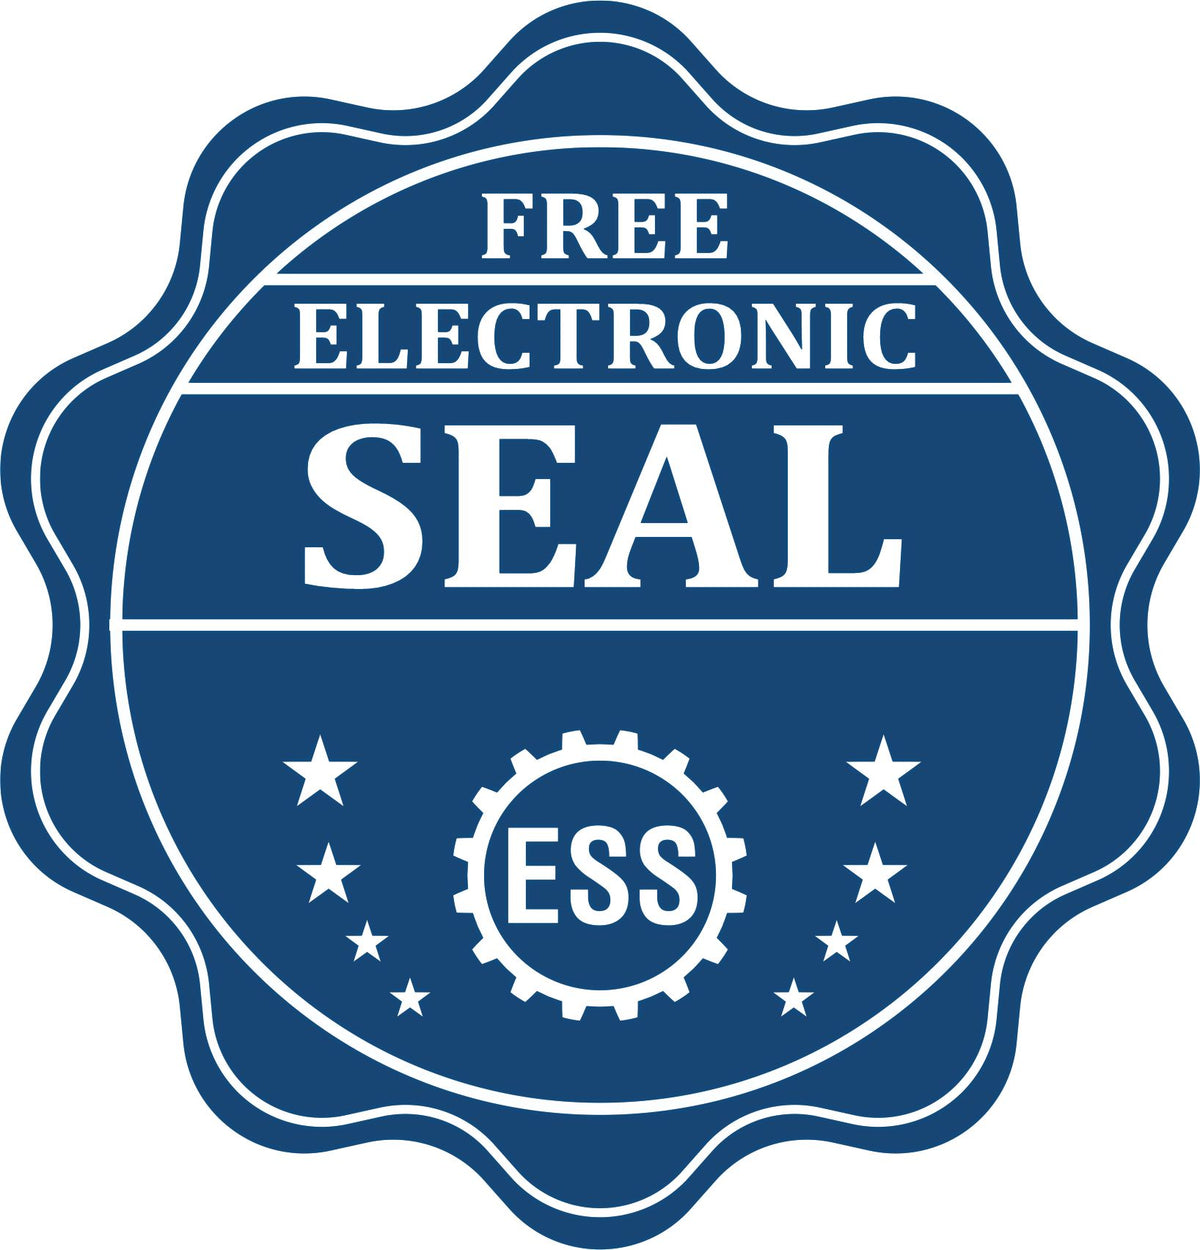 A badge showing a free electronic seal for the Gift West Virginia Land Surveyor Seal with stars and the ESS gear on the emblem.